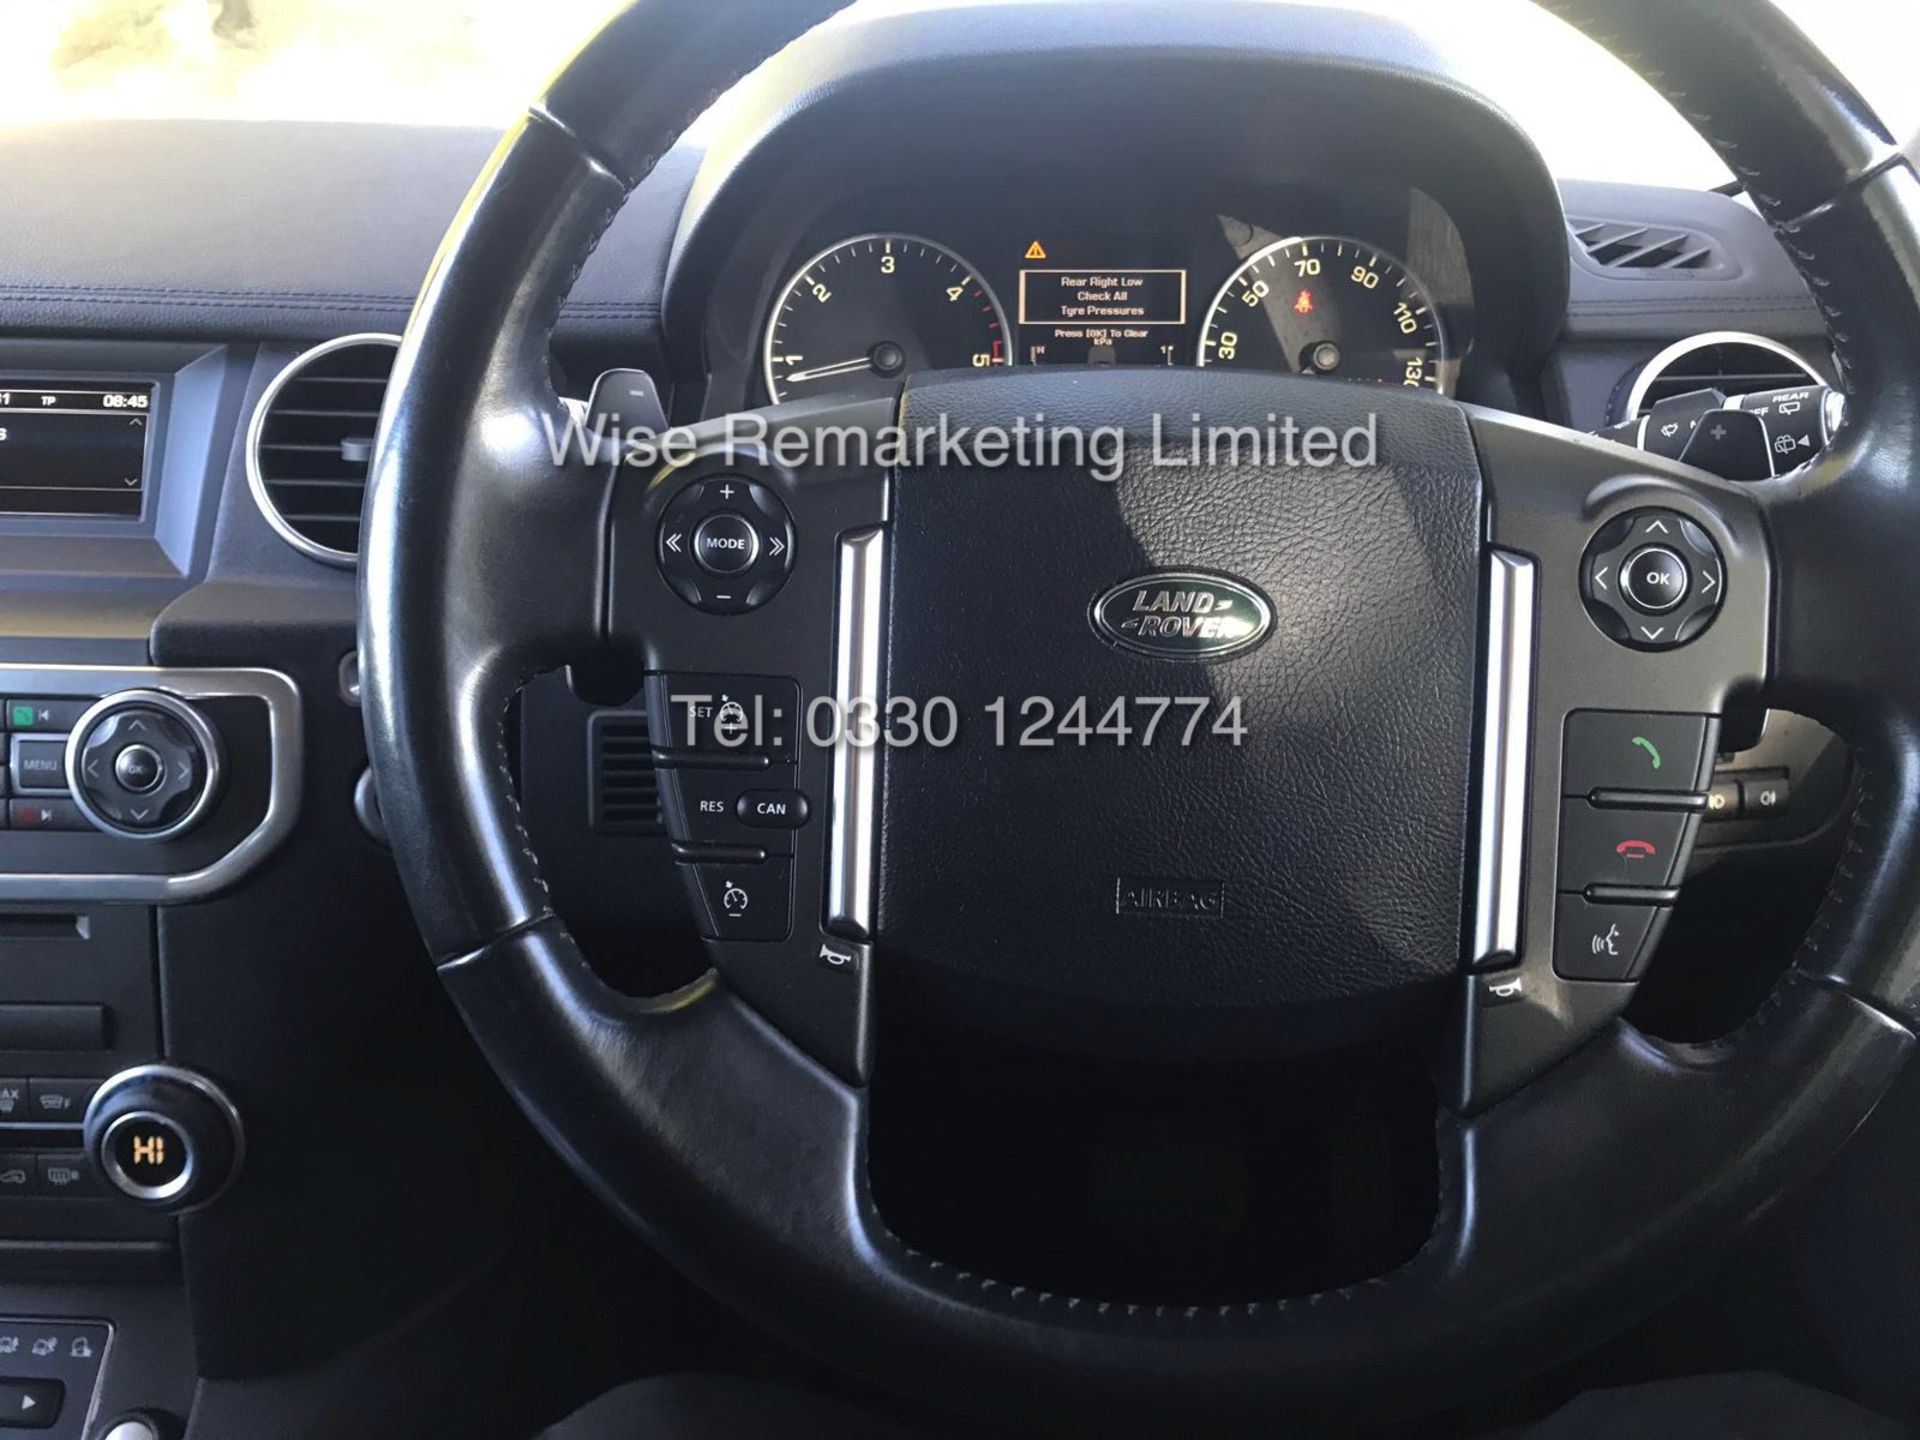 Land Rover Discovery 3.0 SDV6 Special Equipment Automatic - 2015 15 Reg - 1 Keeper From New - Image 13 of 30